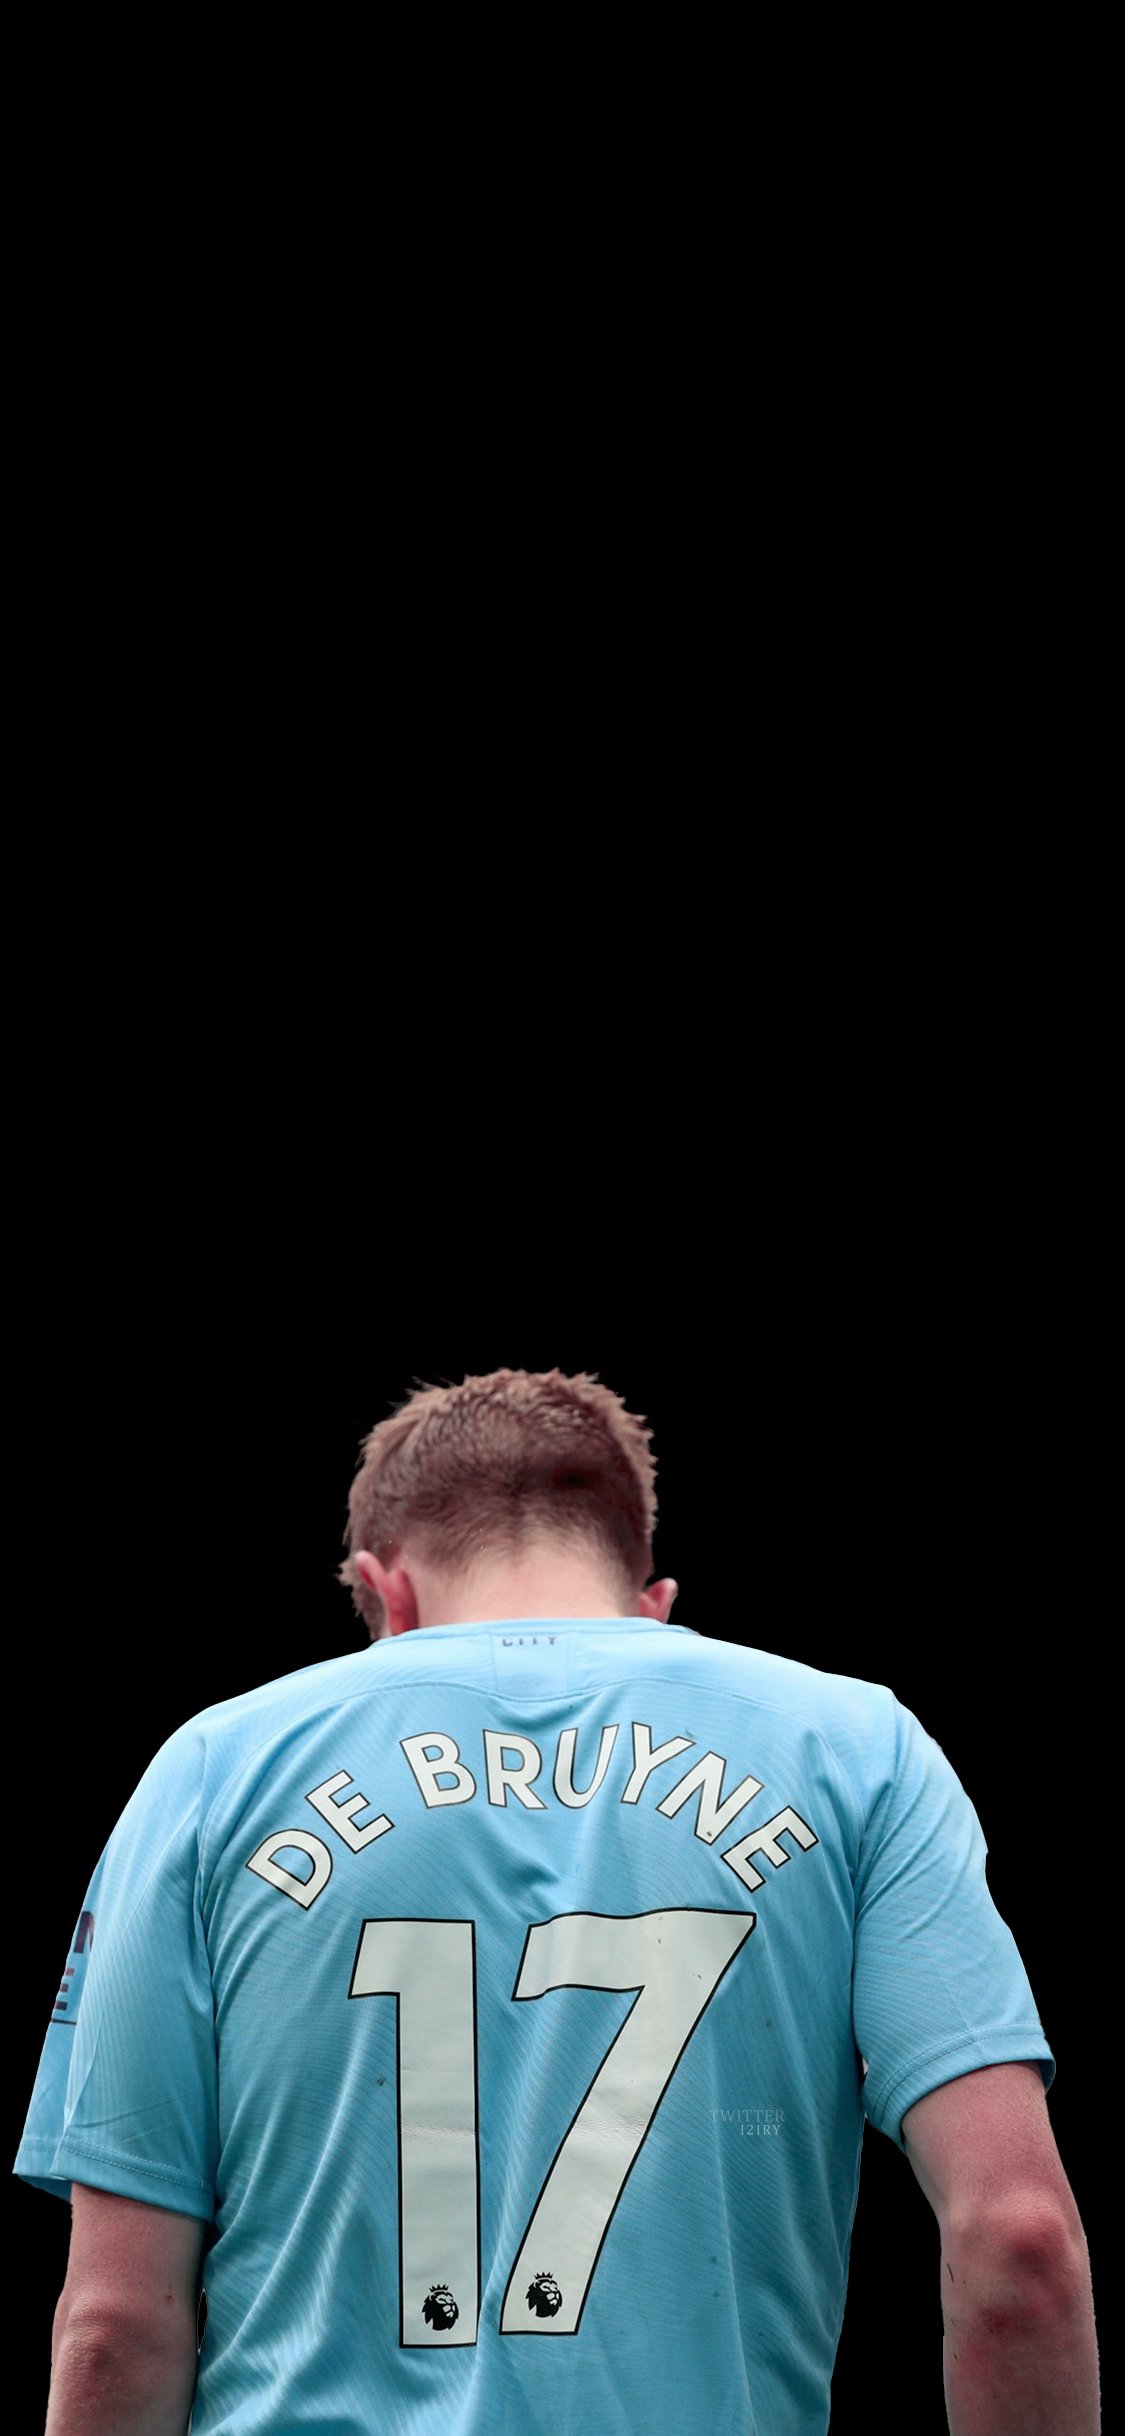 300+] Manchester City Wallpapers | Wallpapers.com